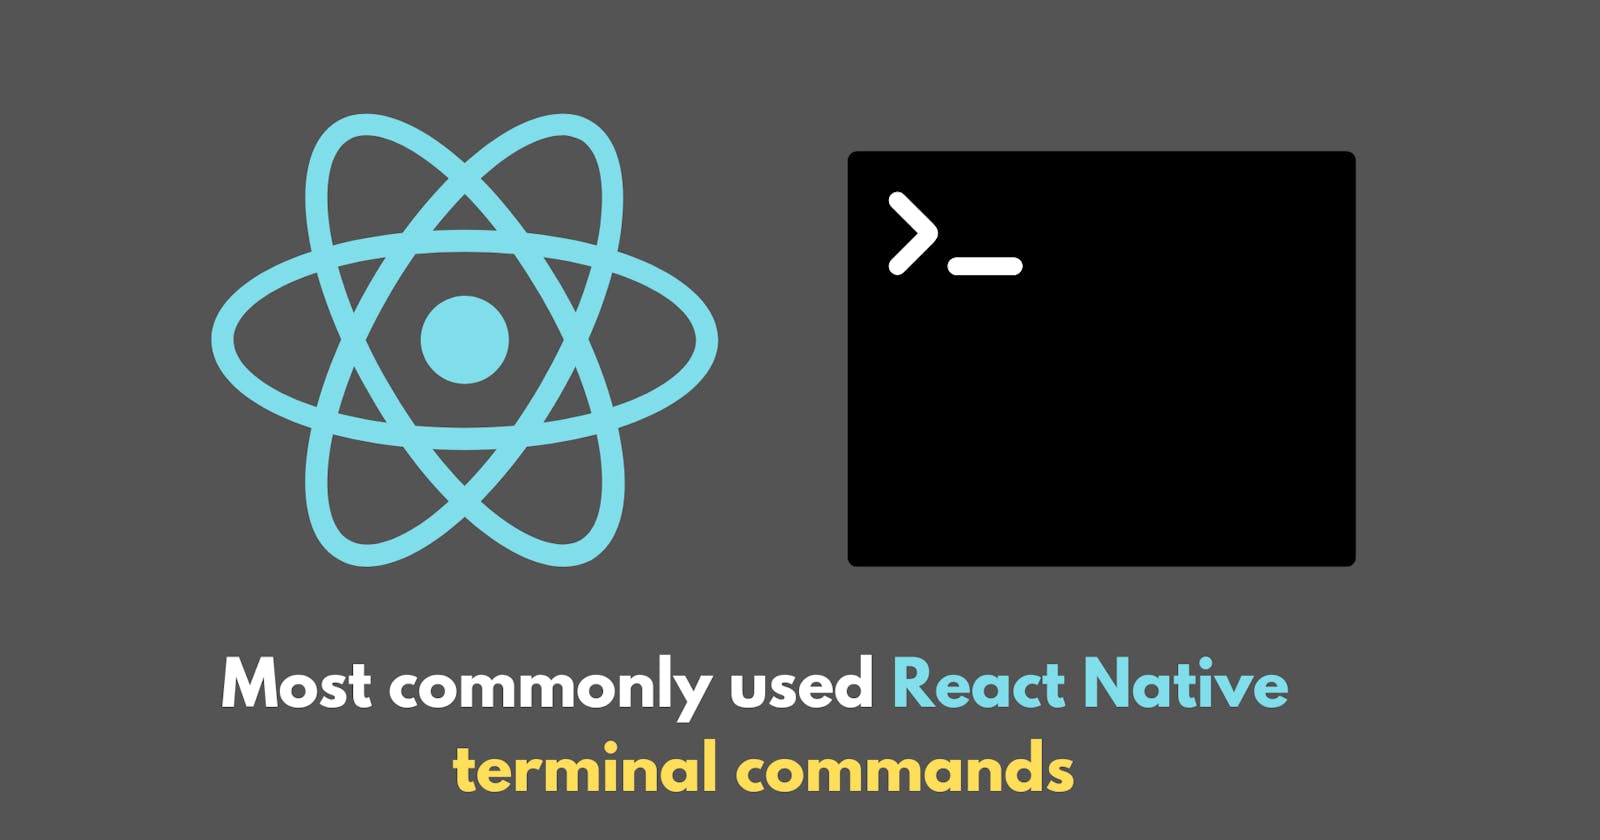 Most commonly used React Native terminal commands